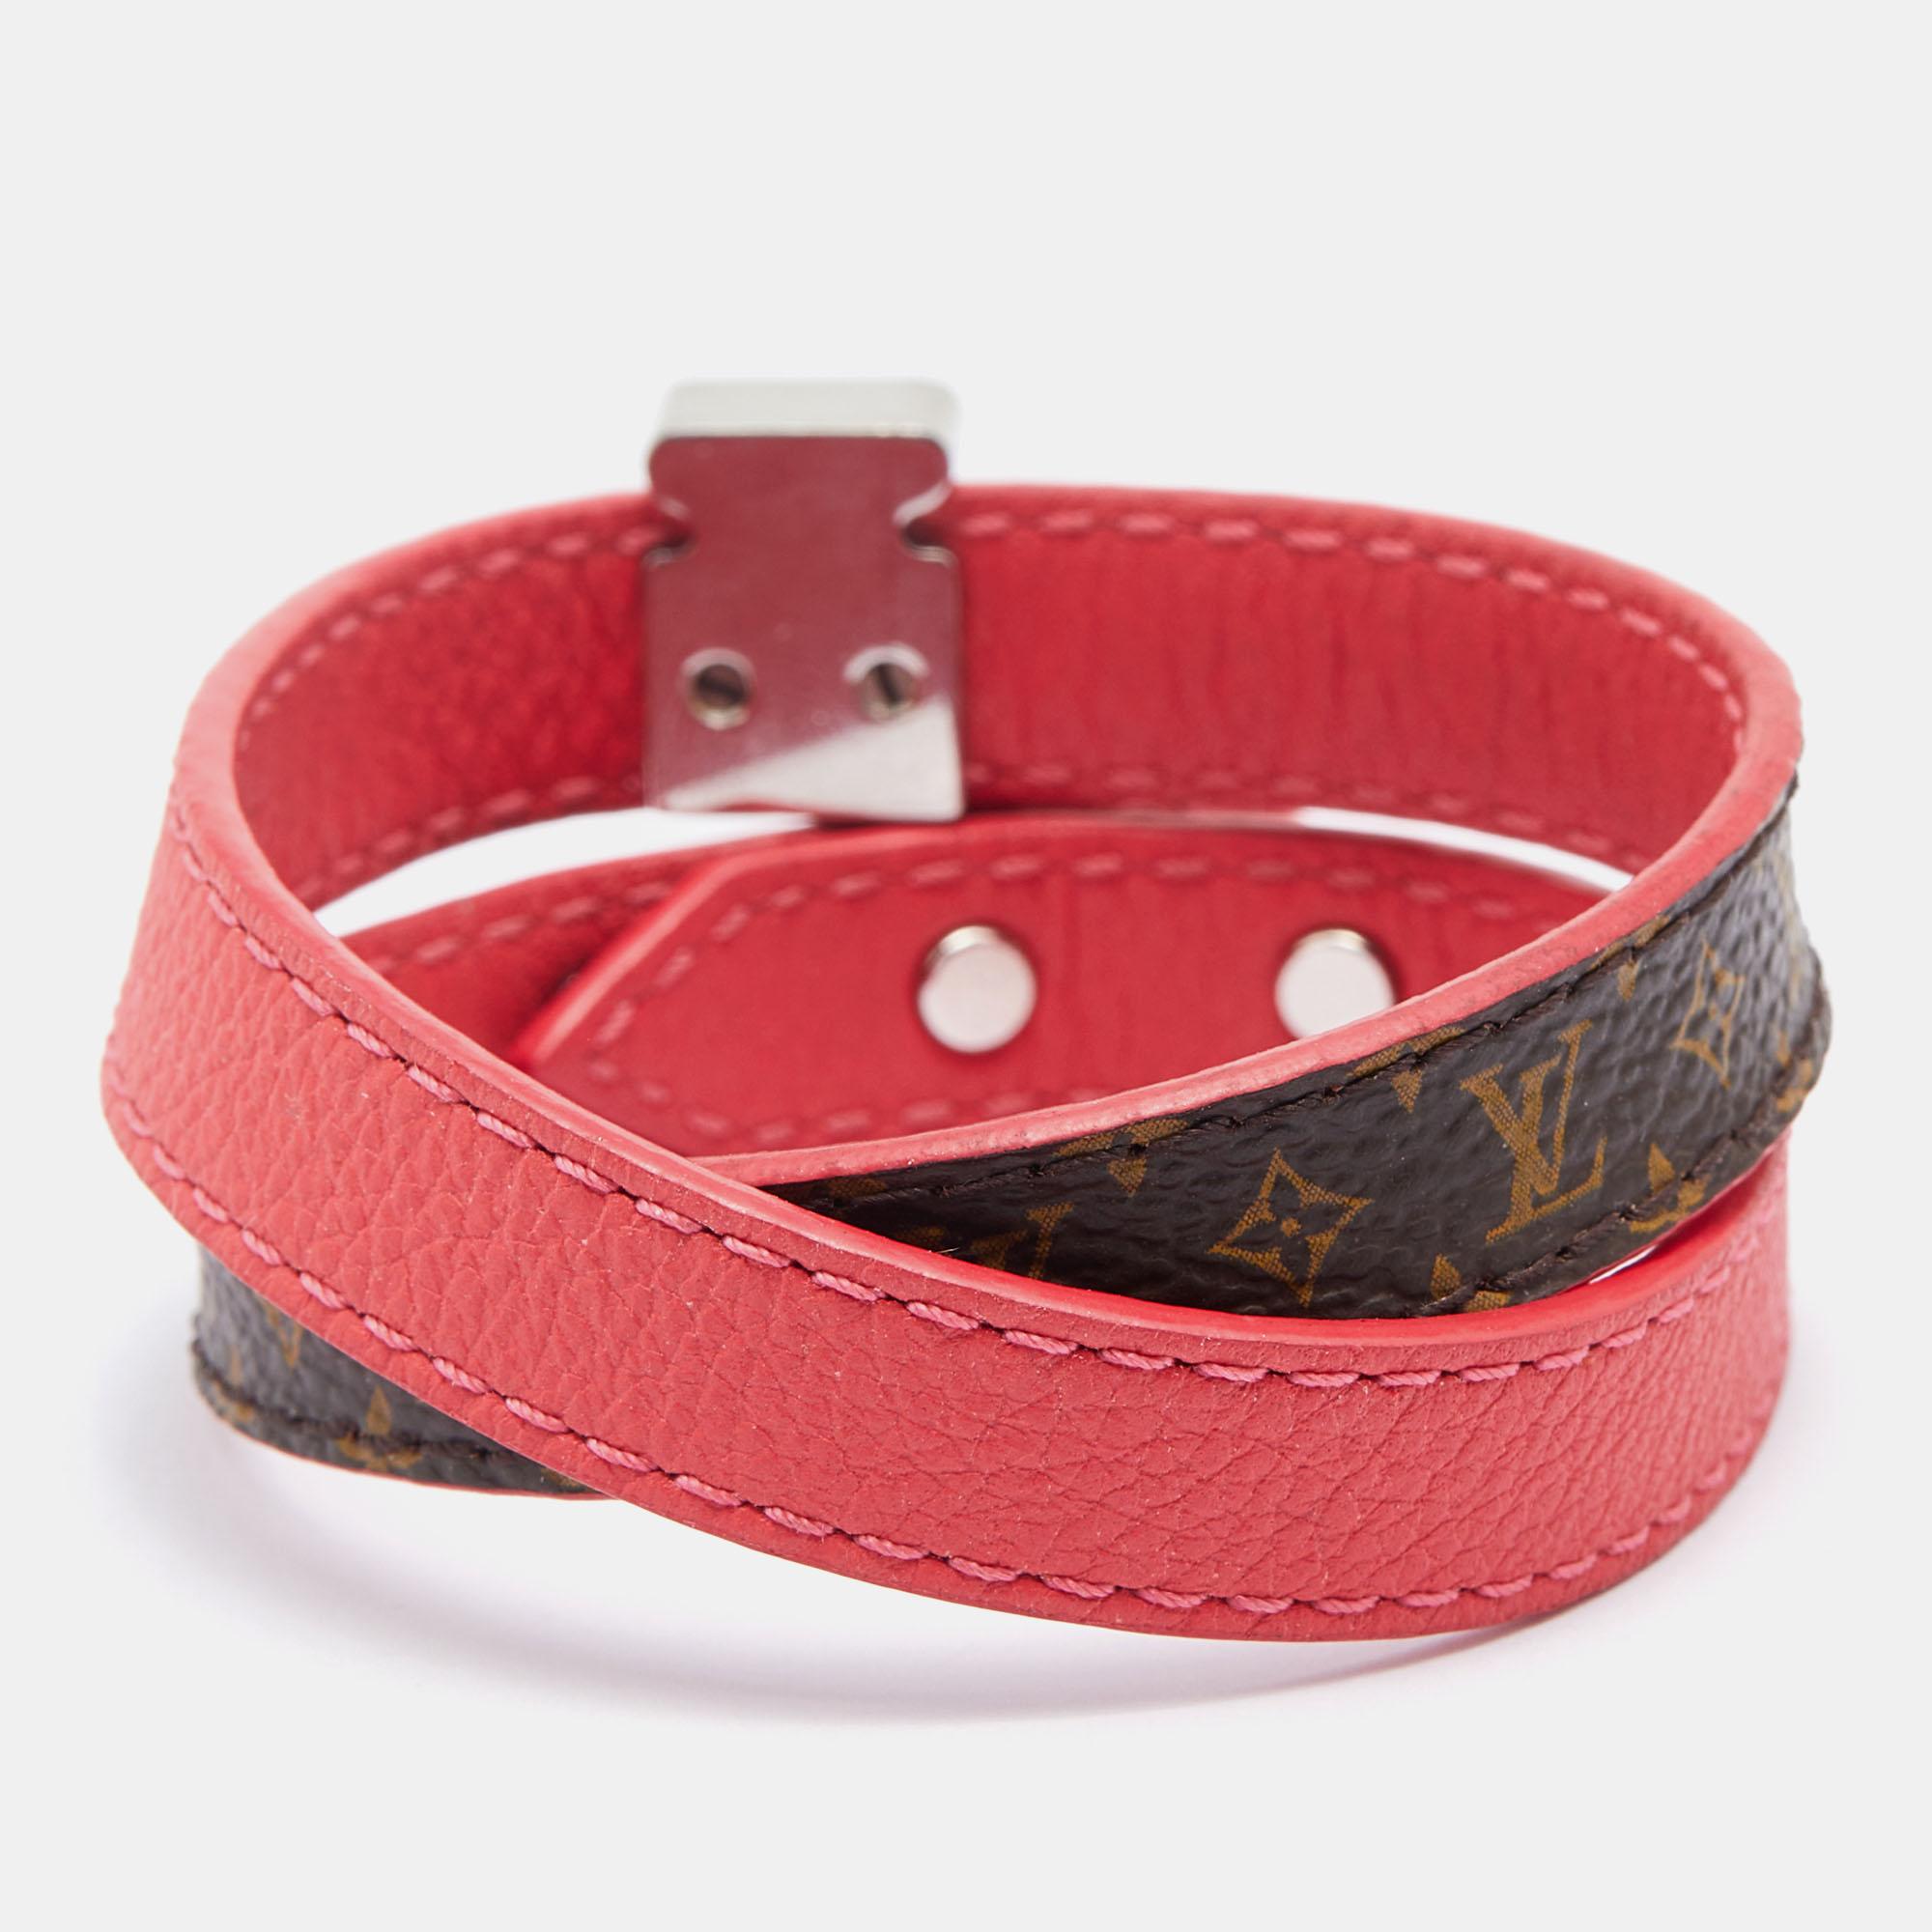 The luxe design is set with distinct elements to give the creation a classy touch. This Lockit Double Wrap bracelet by Louis Vuitton will look great when paired with other bracelets and even solo.

